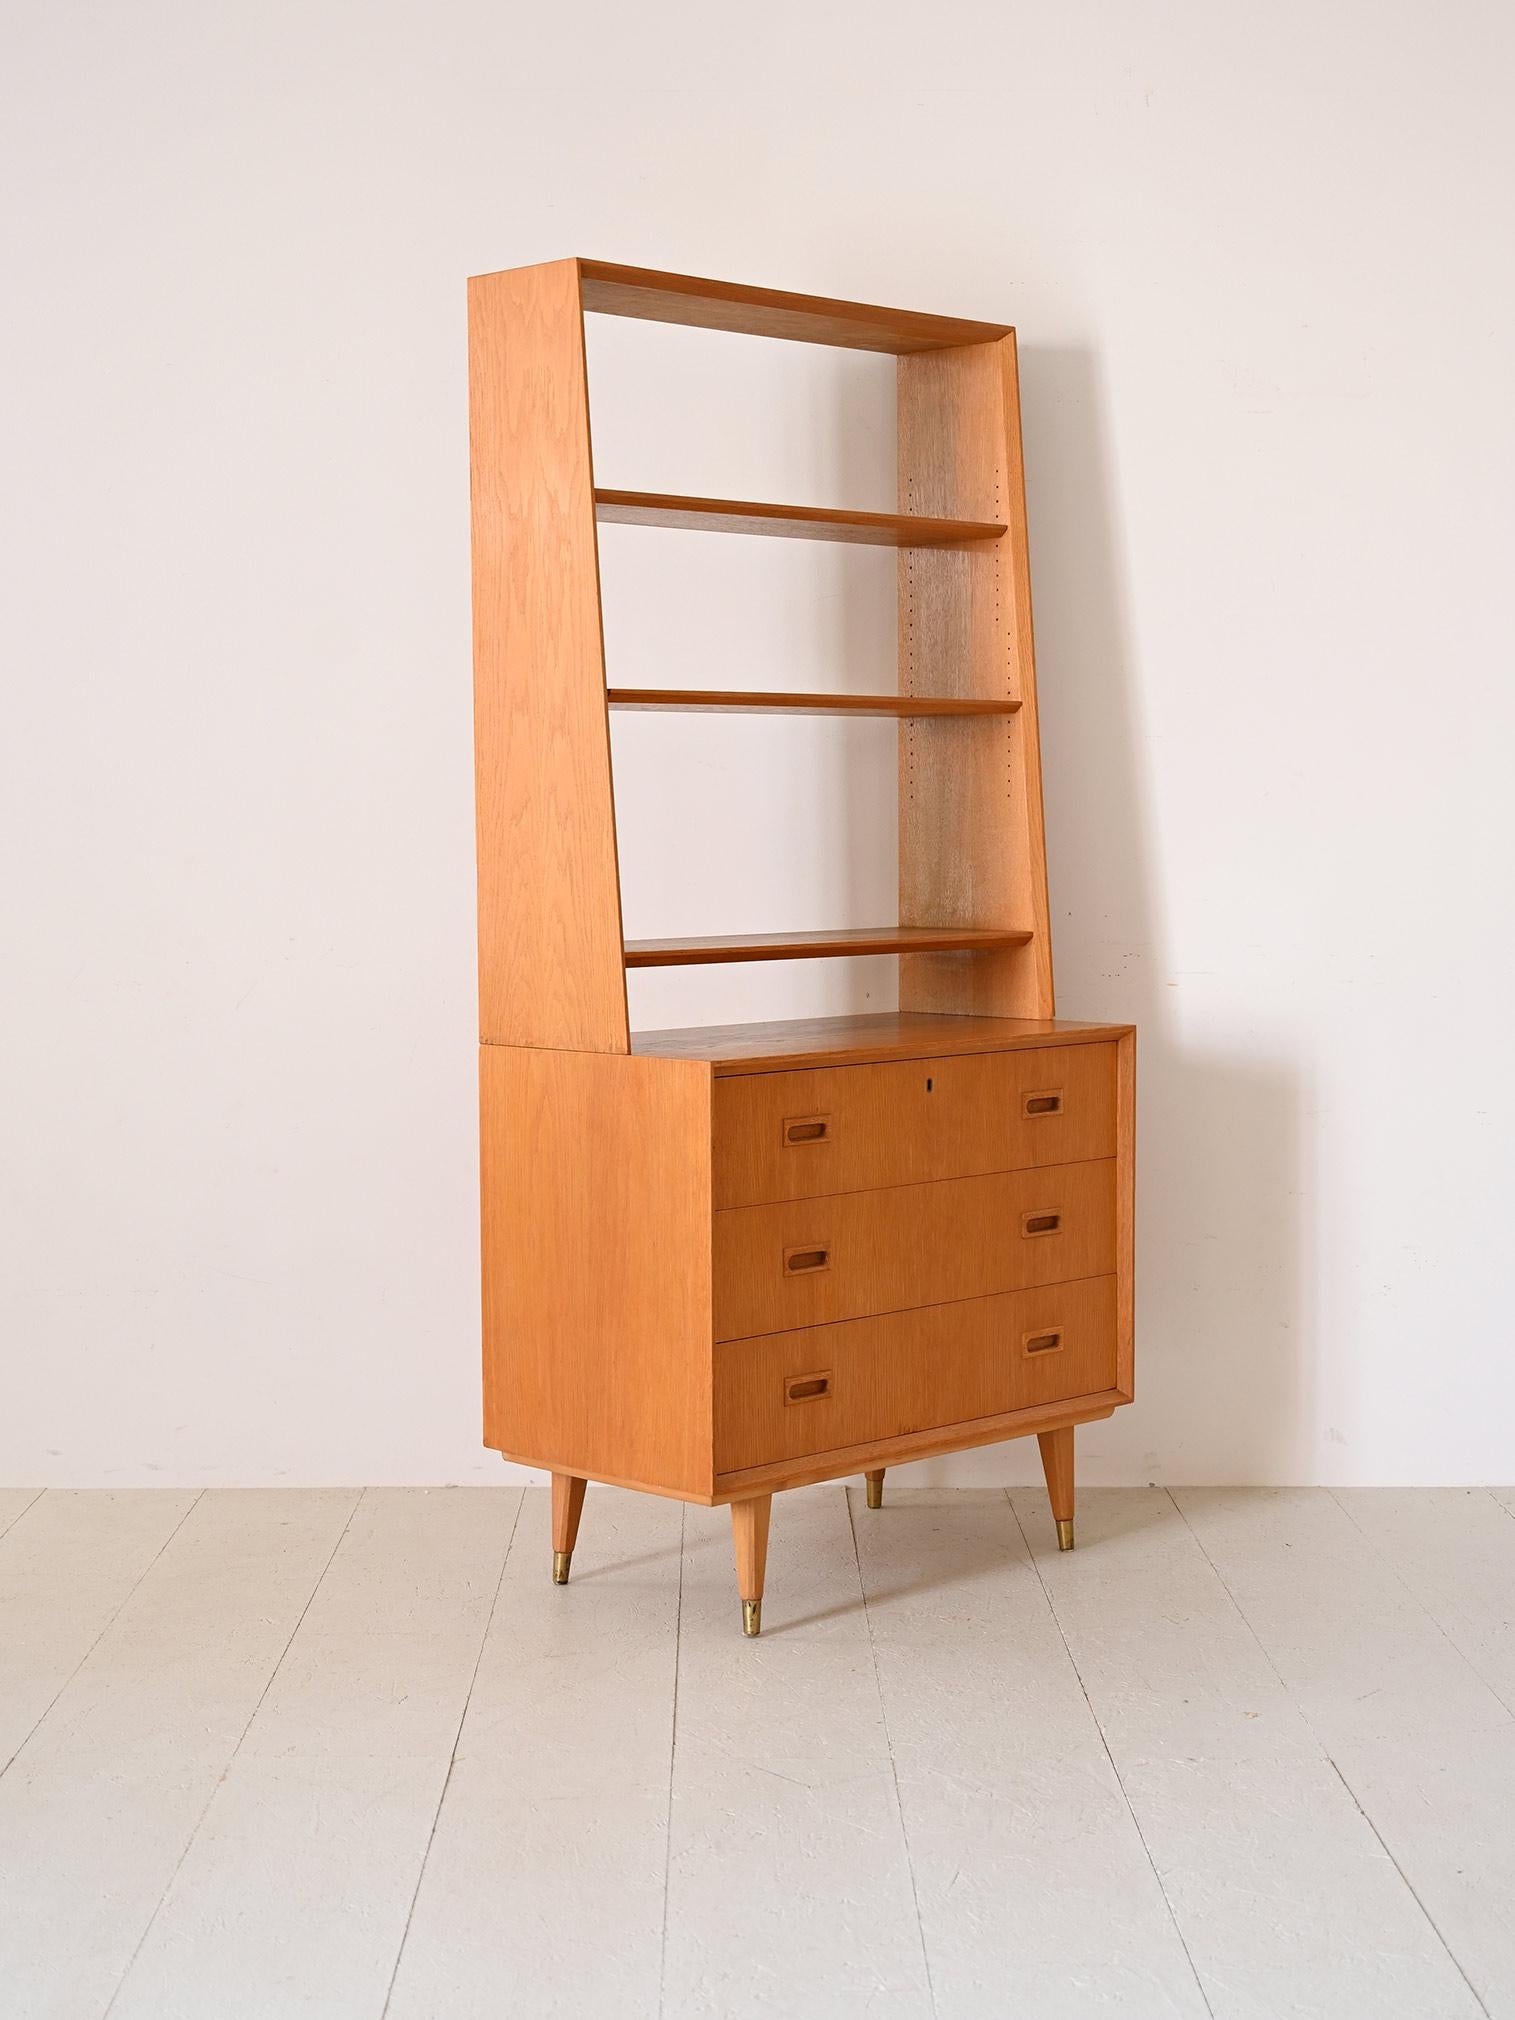 oak bookcases with drawers